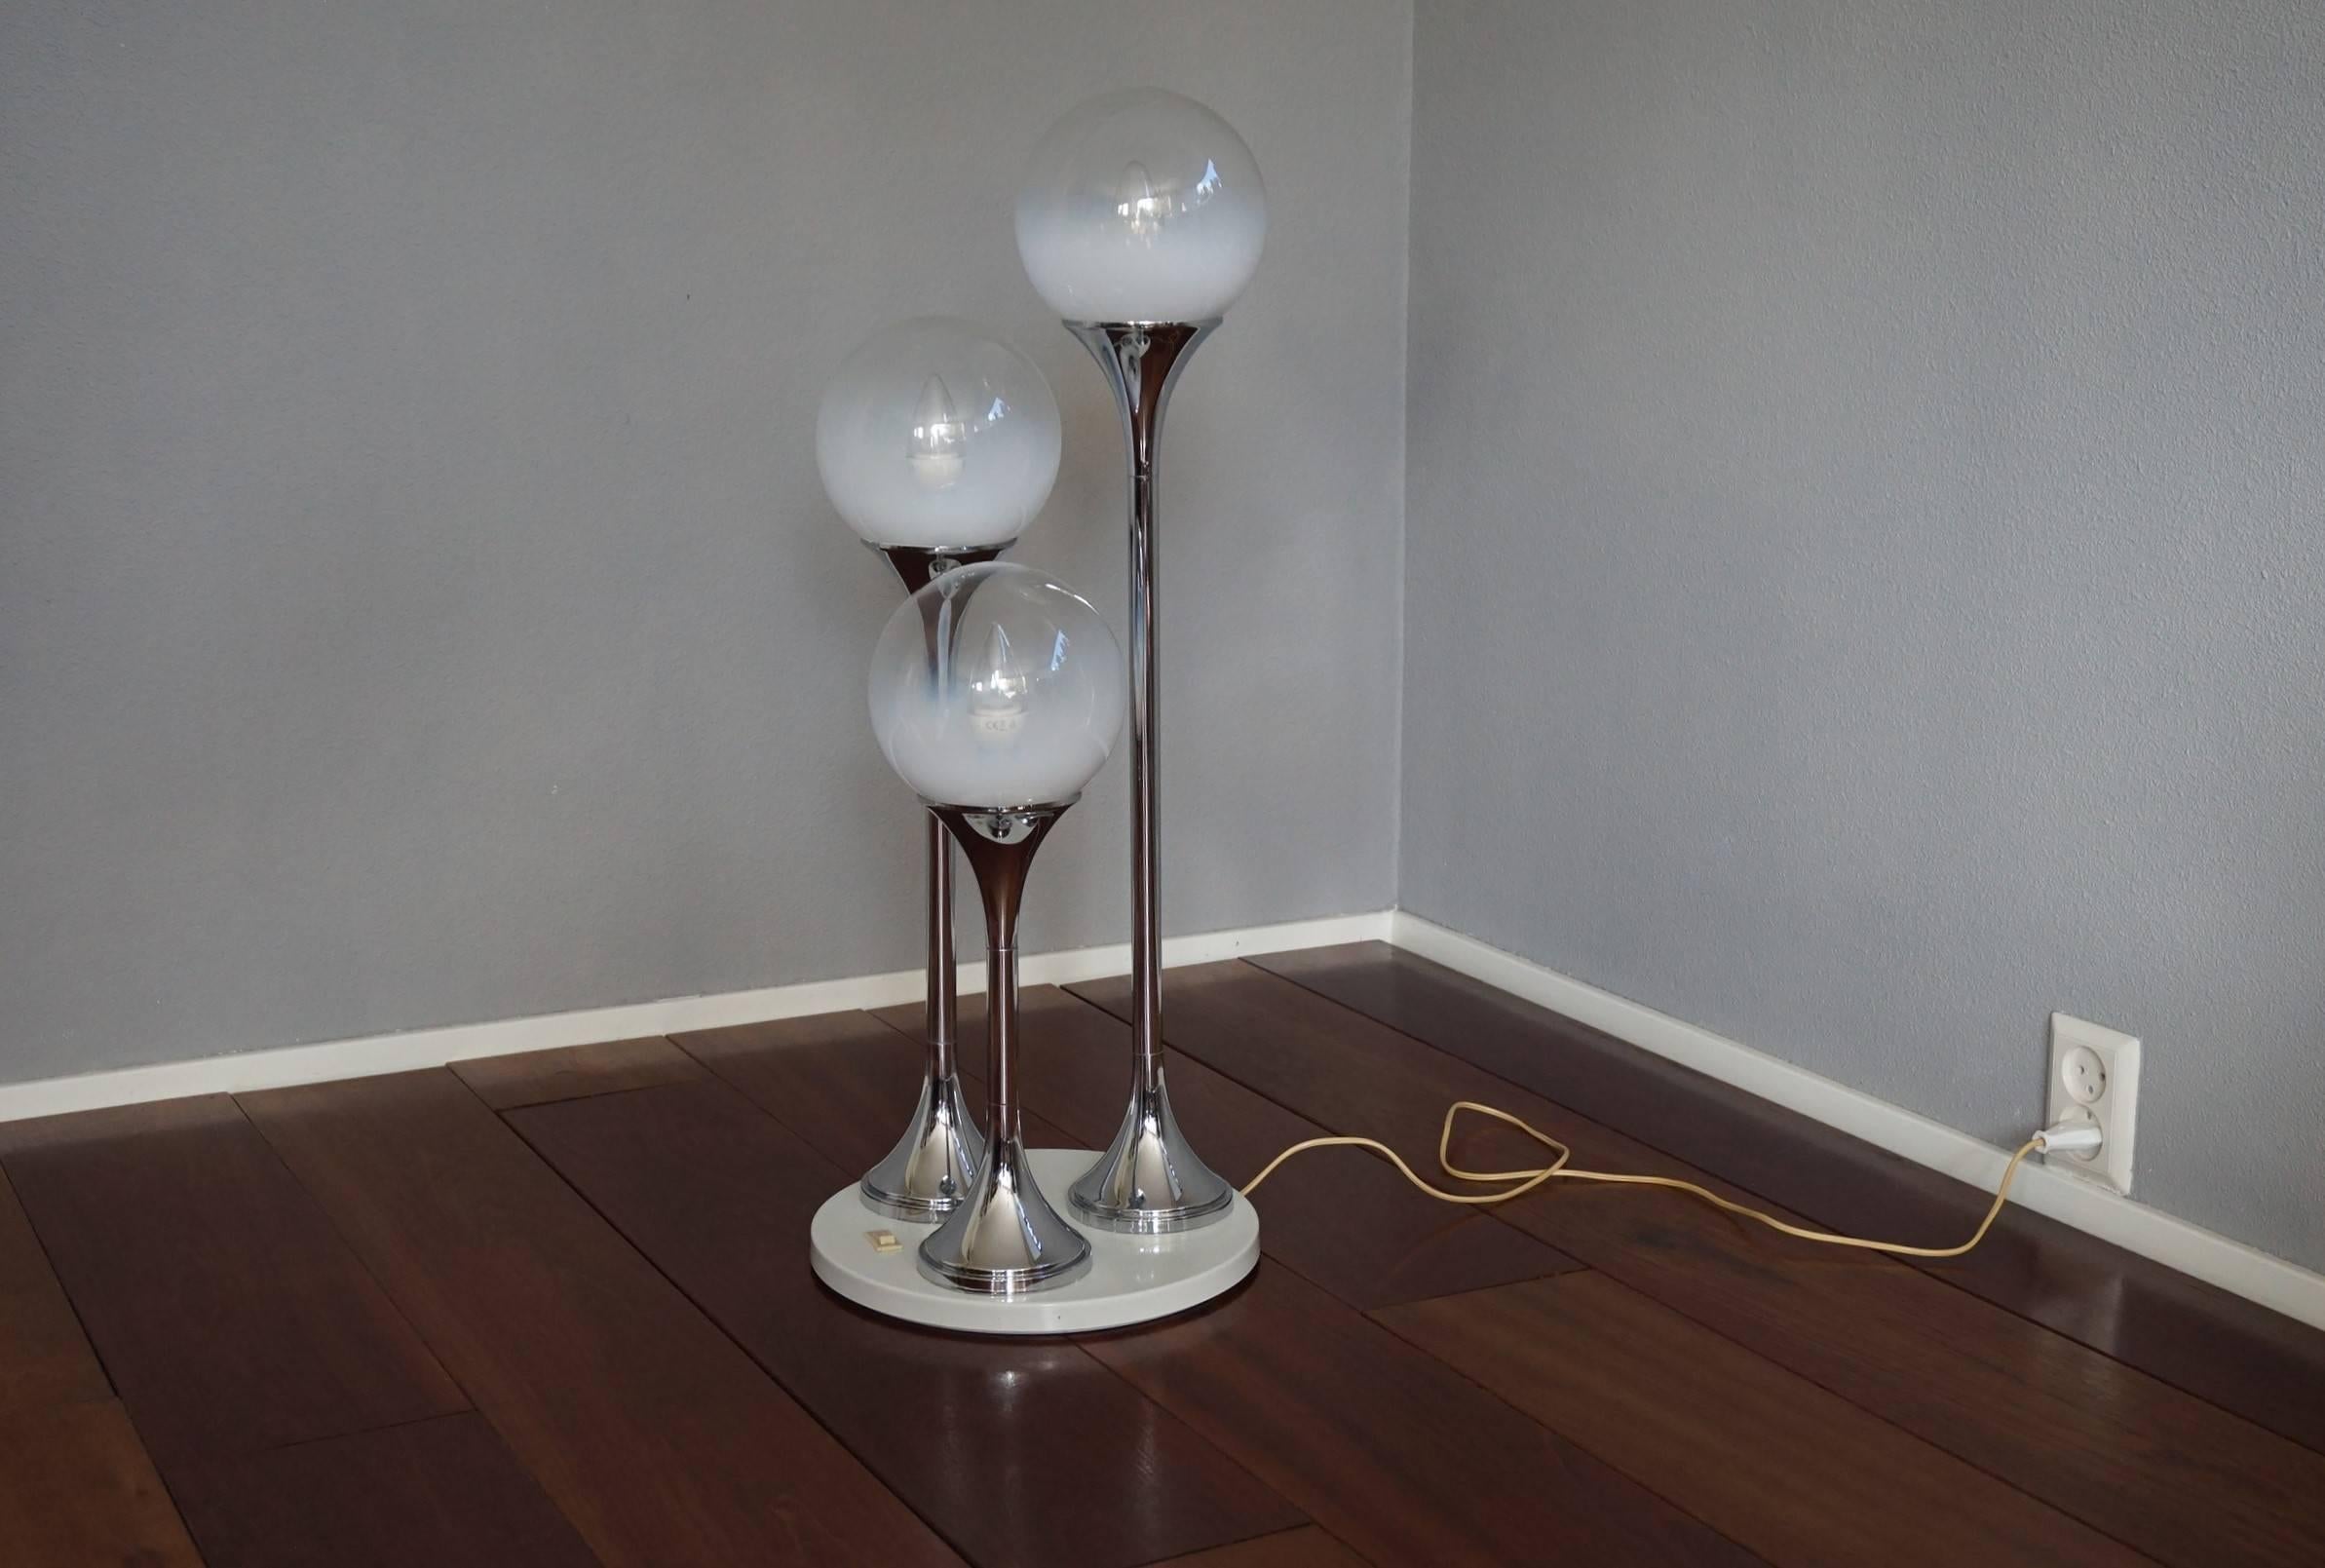 Chrome and glass midcentury lamp.

This Targetti Sankey lamp is another one of our recent finds. The combination of the white metal base, the chrome stems and the wonderful and mint, glass shades makes this lamp an absolute joy to look at, both on